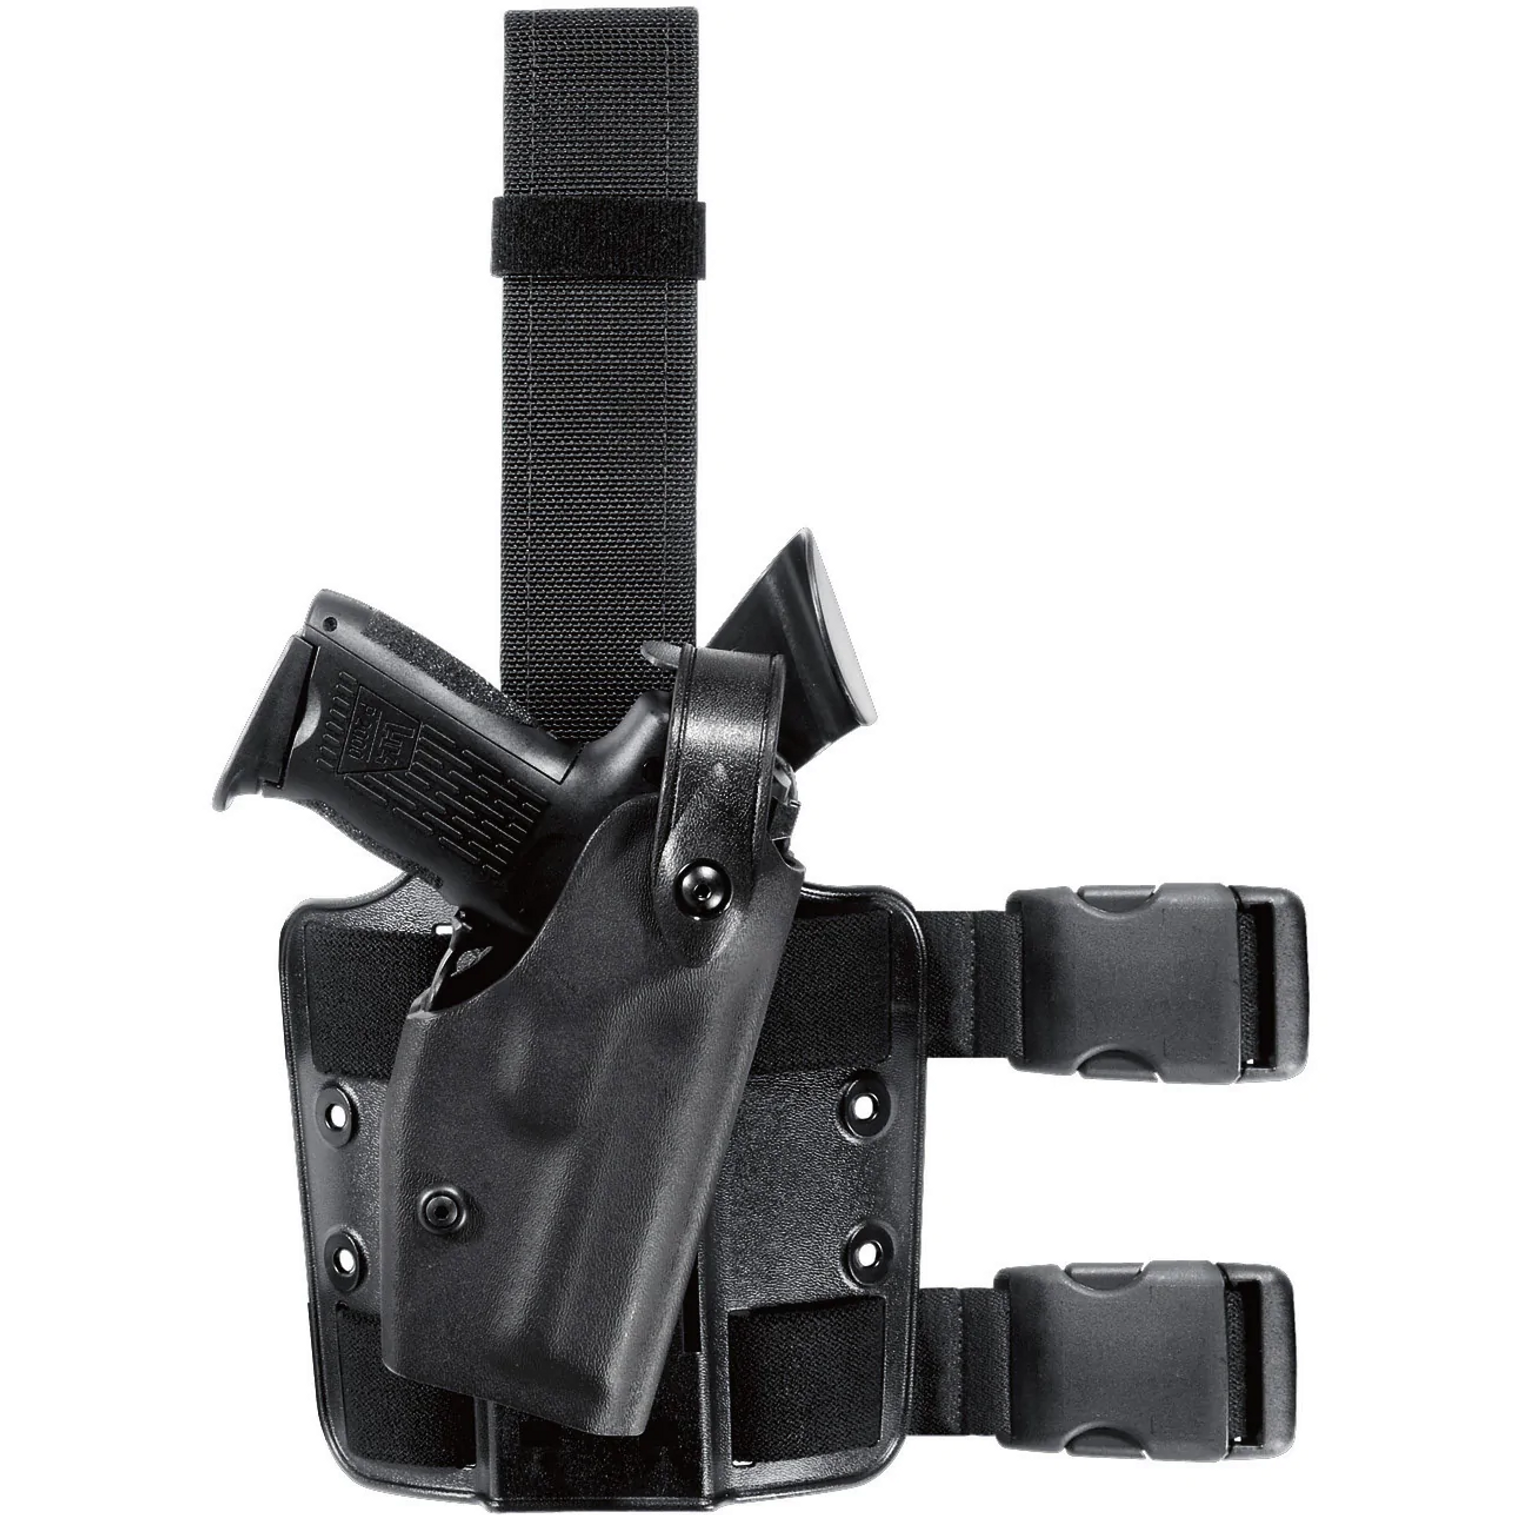 Model 6004 Sls Tactical Holster For Smith & Wesson 4566tsw